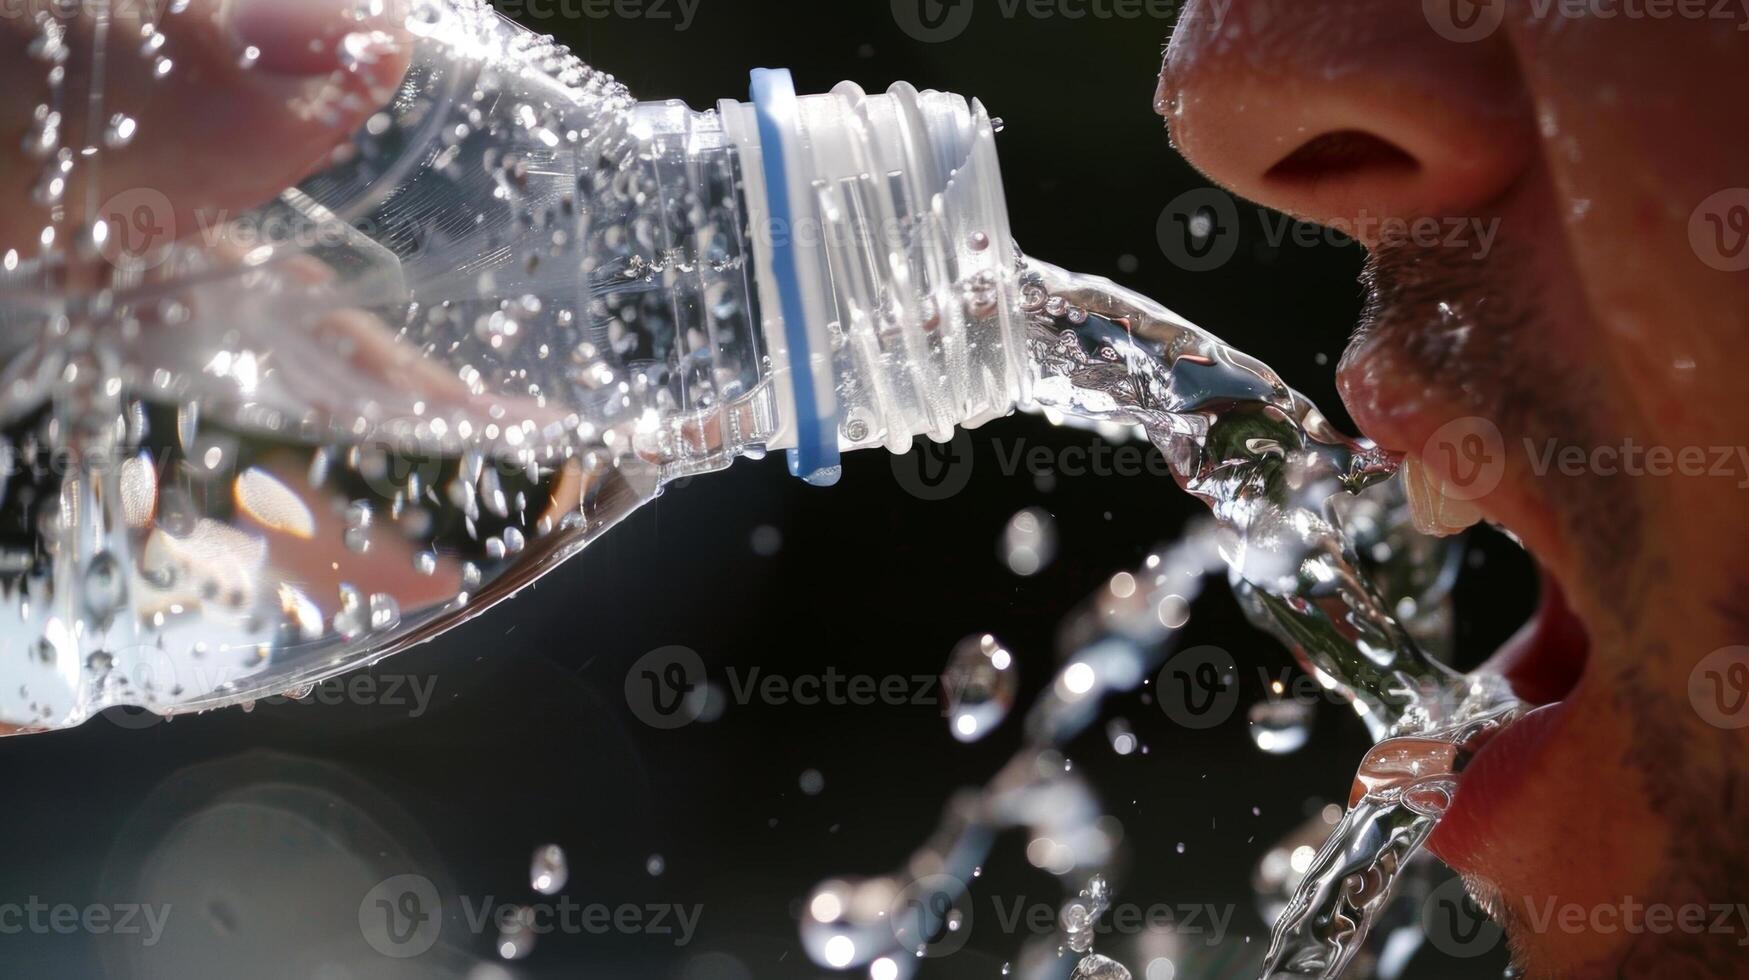 A person takes a sip of icecold water from their water bottle the contrast between hot and cold stimulating their senses and promoting a state of balance. photo